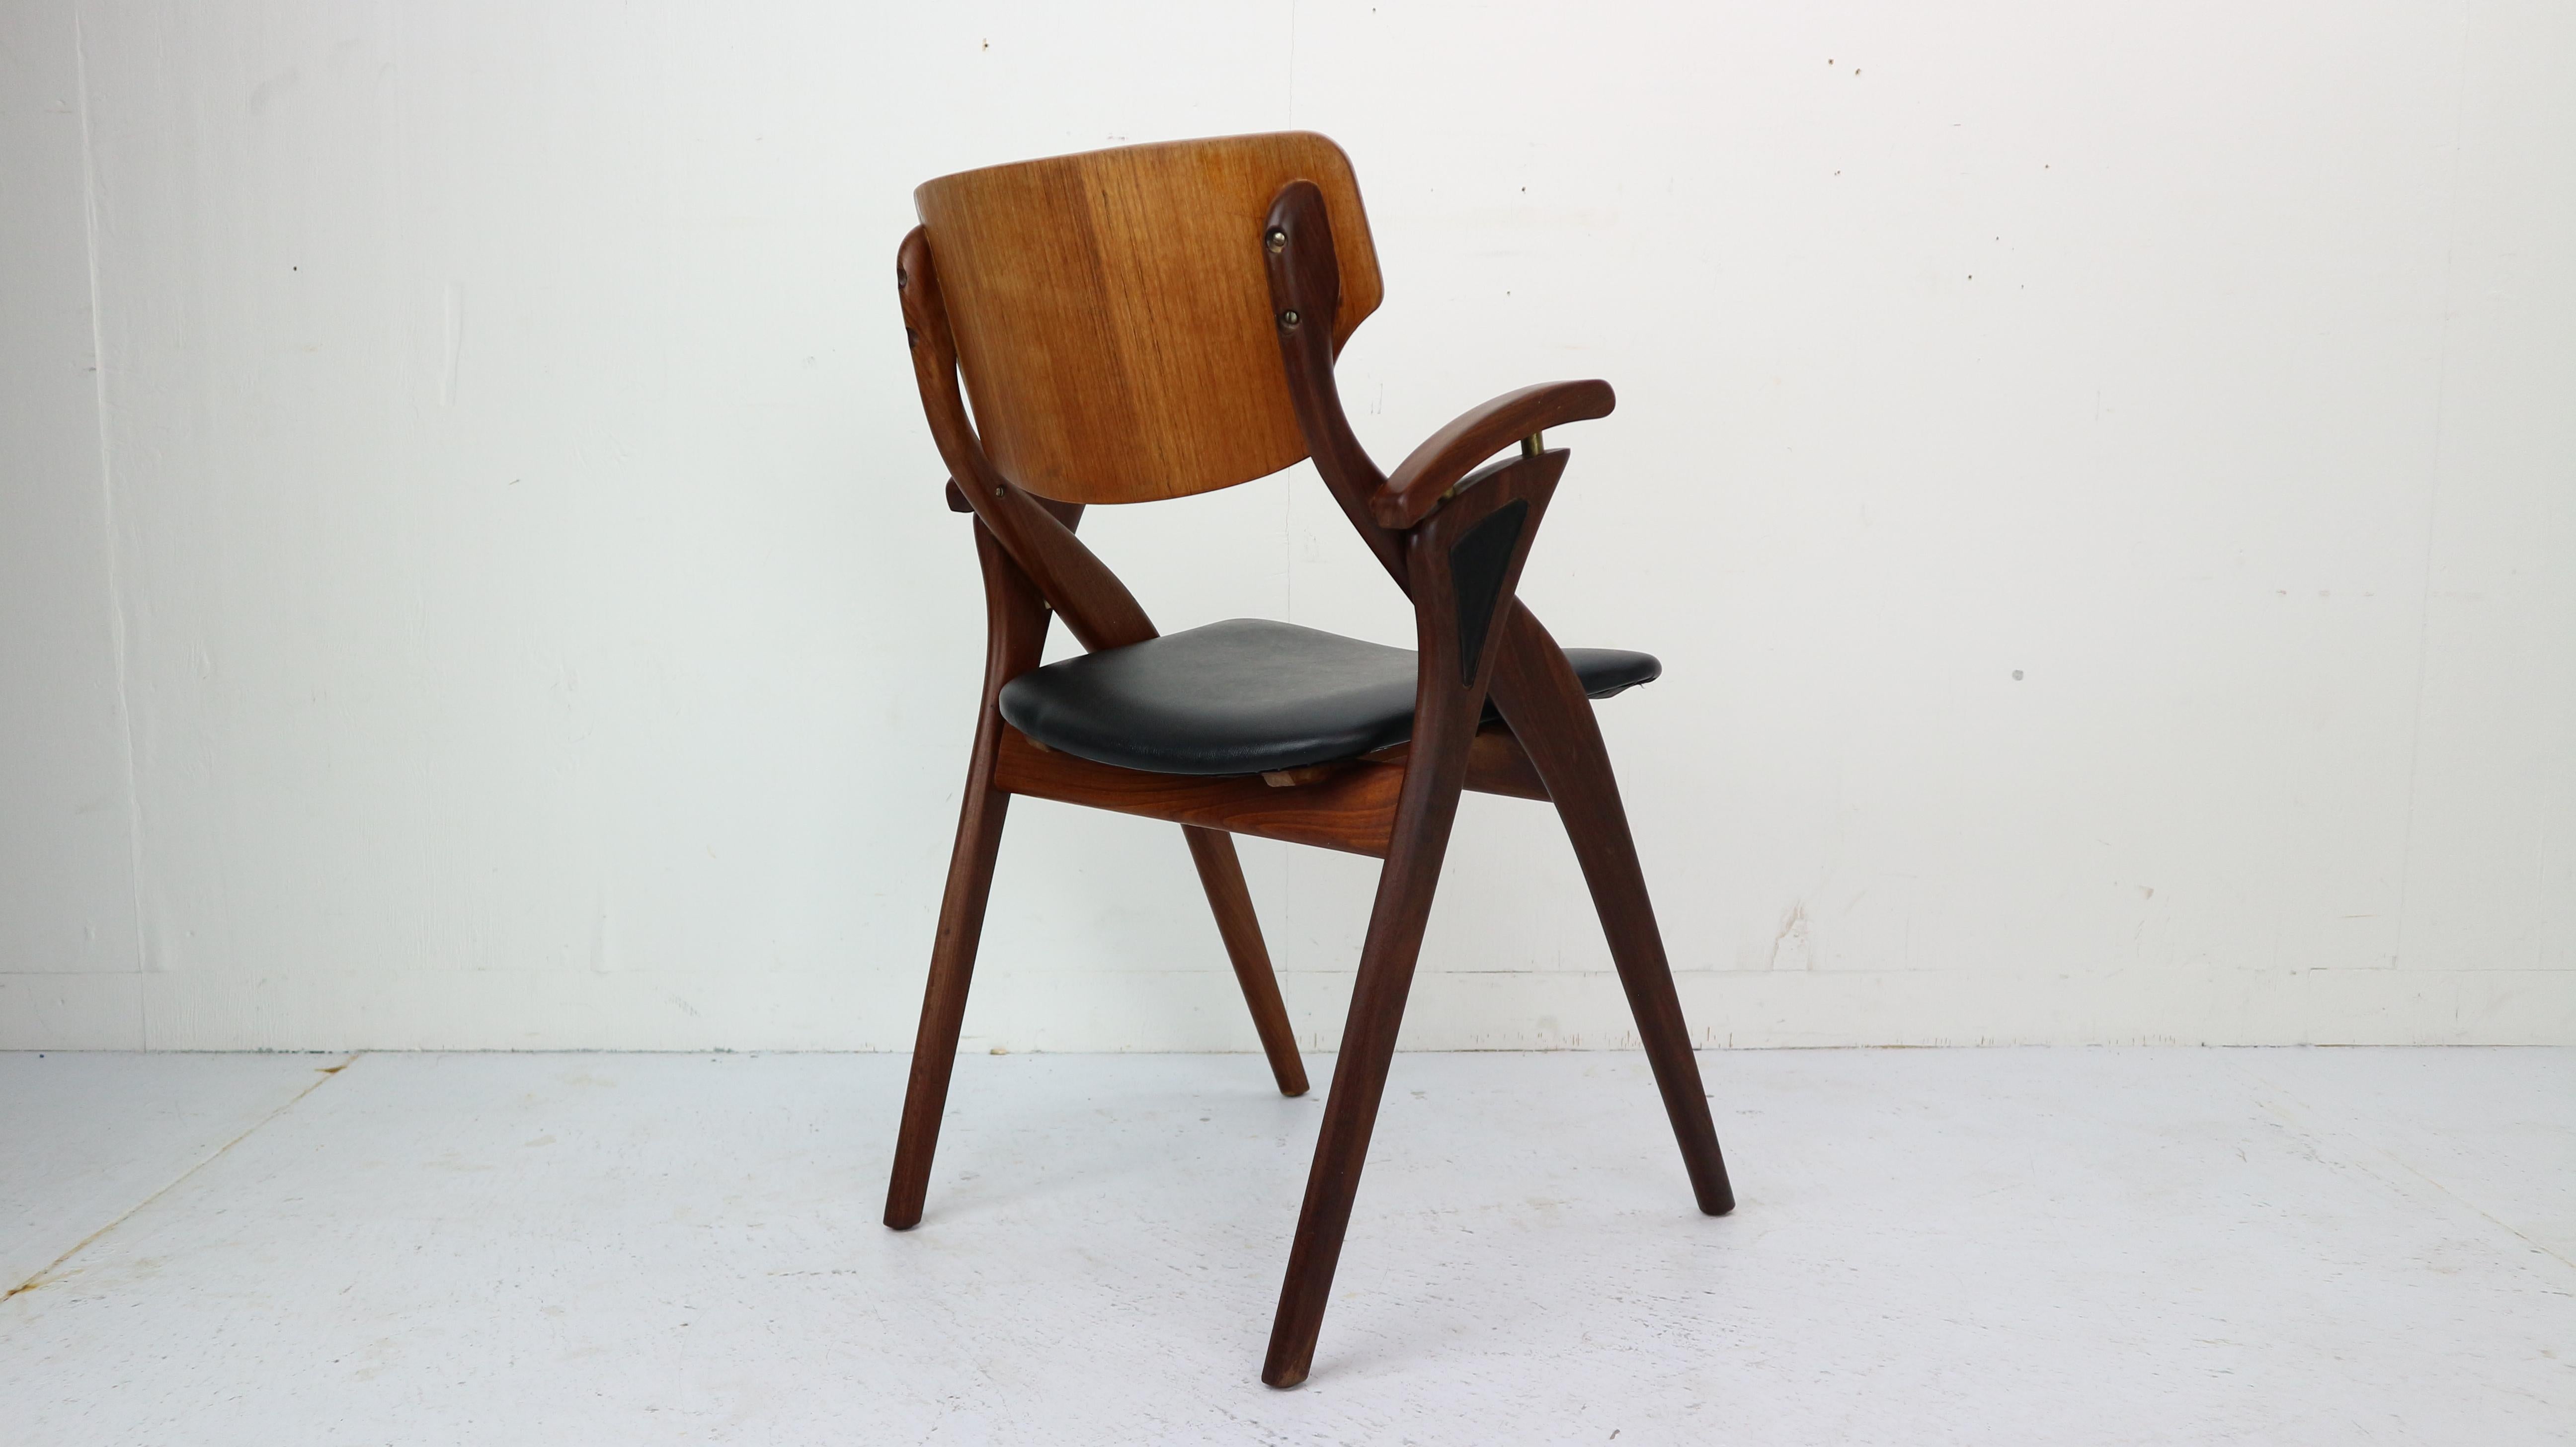 This sculptural chair is designed by the Dane Arne Hovmand-Olsen for Mogens Kold Møbelfabrik in 1960's Denmark.
Teak wooden frame. The seating’s of the chair is upholstered with black faux leather.
The chair is organic in its shape with elegant